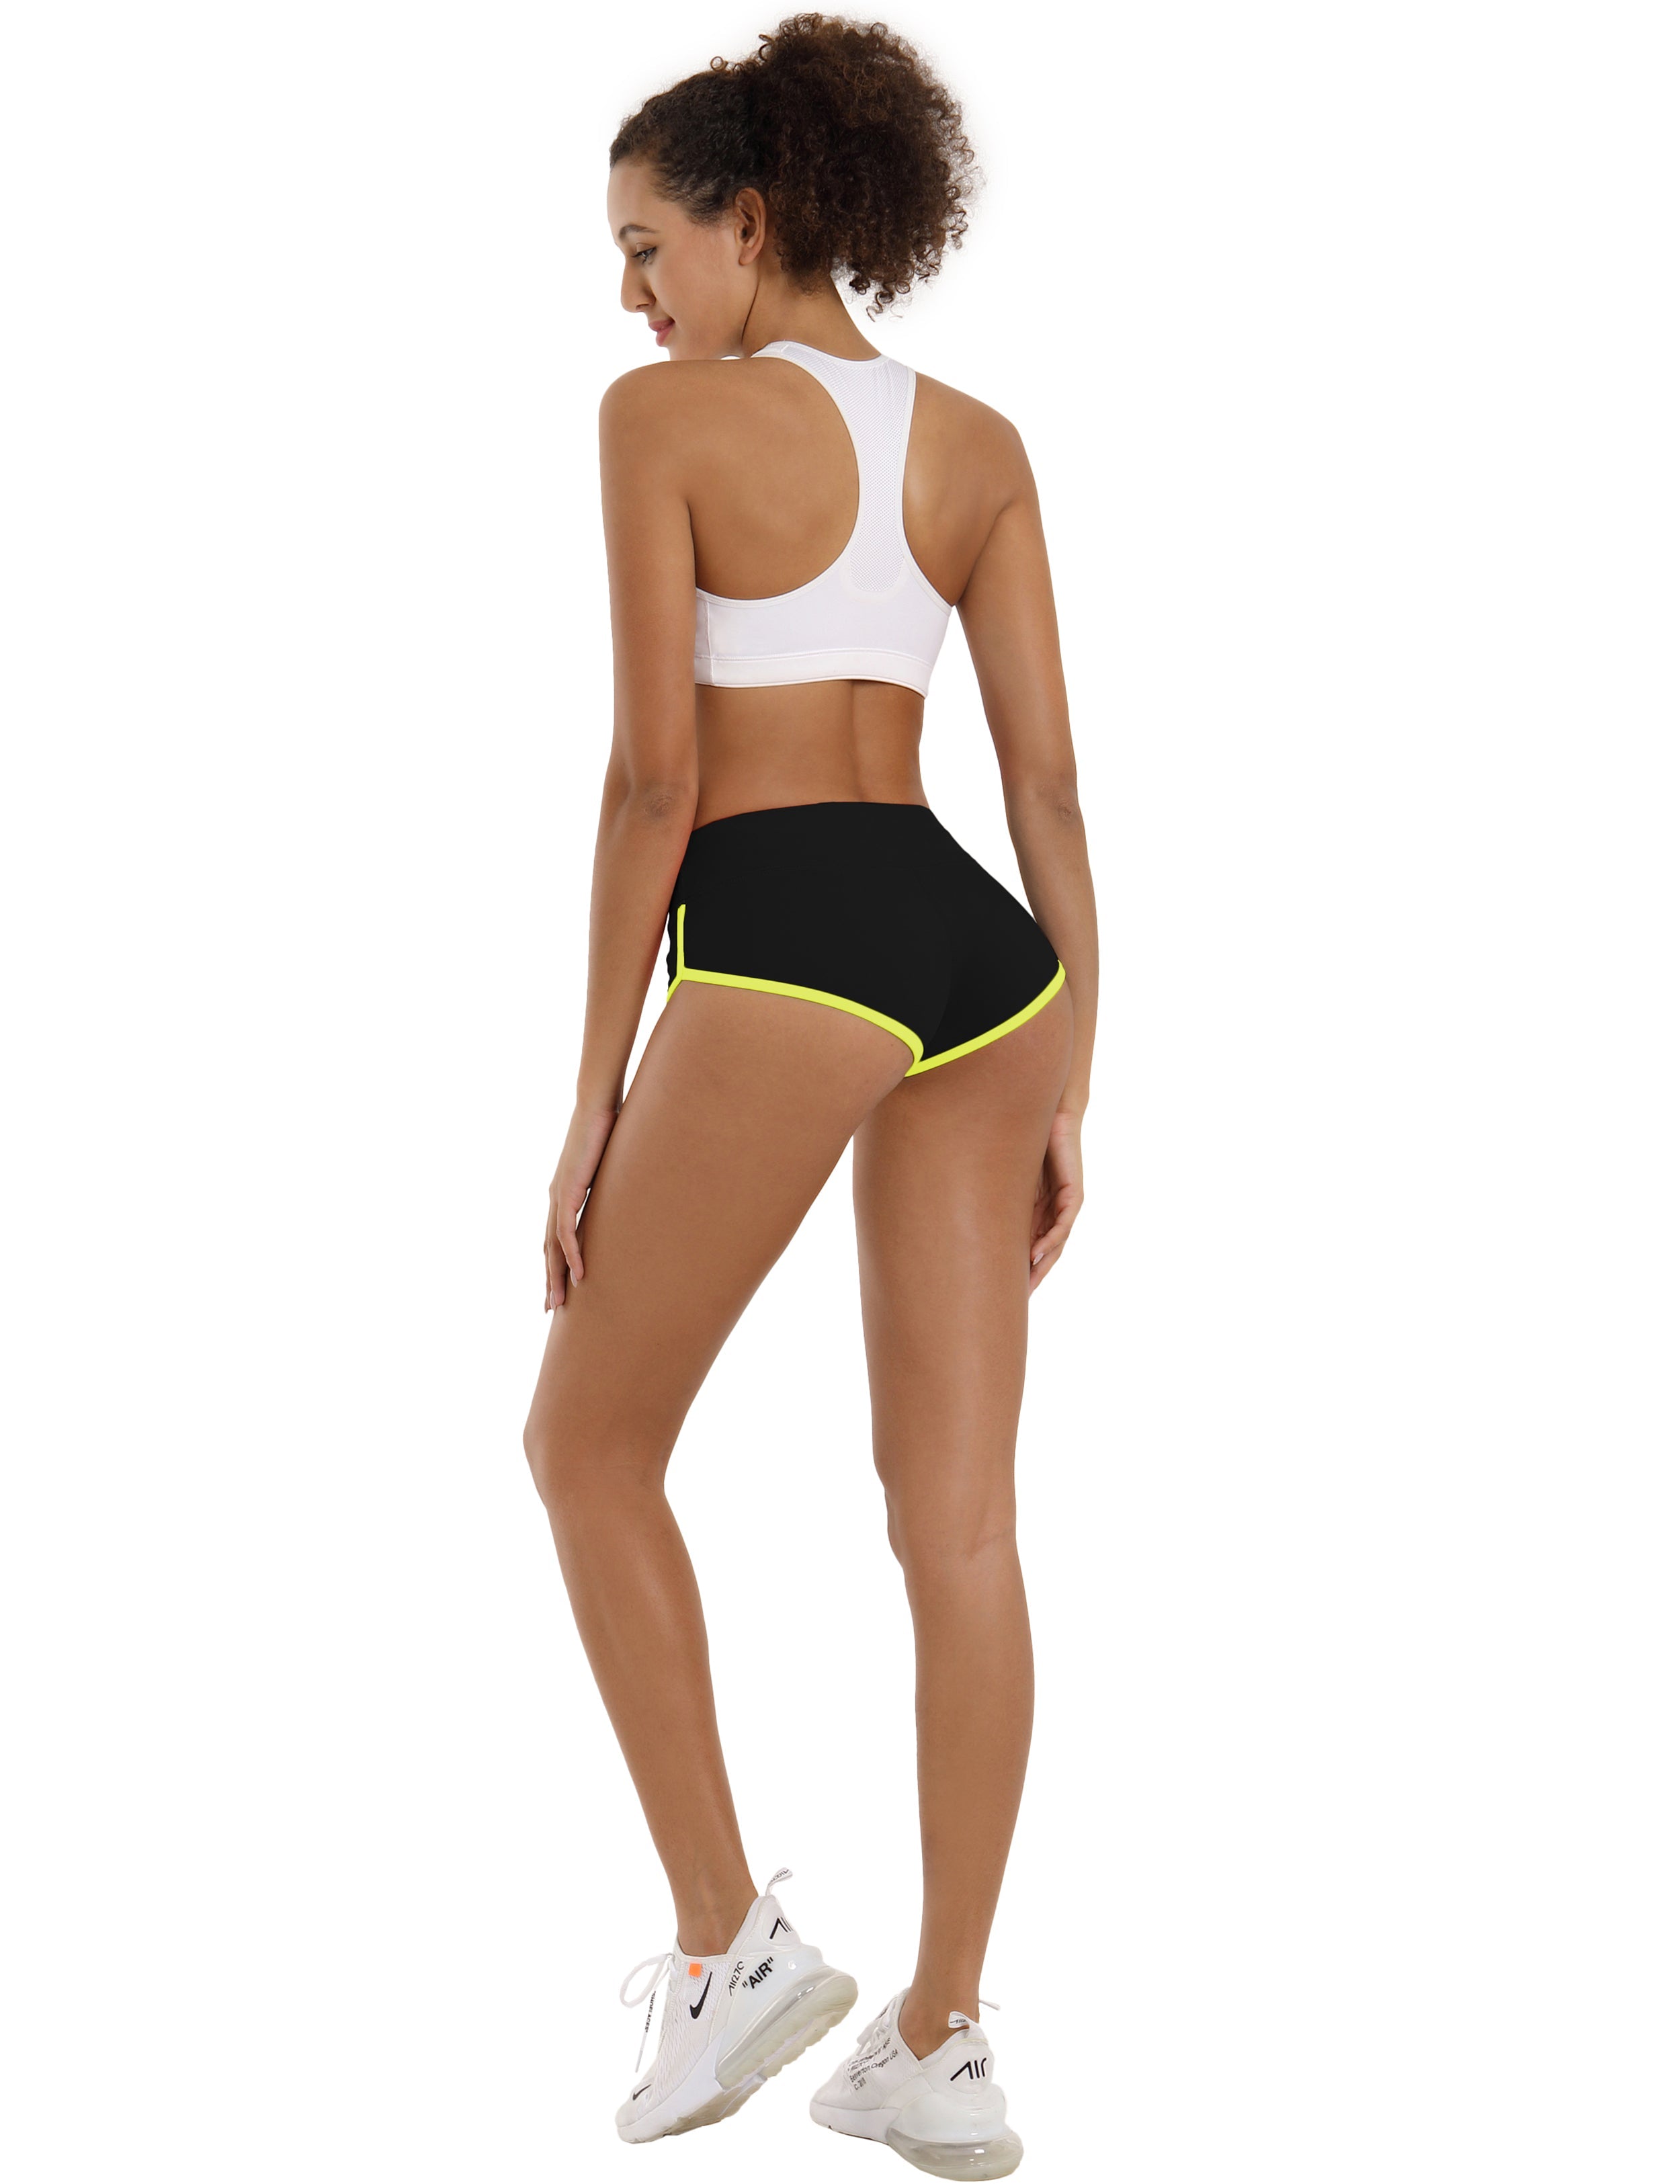 Sexy Booty Yoga Shorts black_fluorescentyellow Sleek, soft, smooth and totally comfortable: our newest sexy style is here. Softest-ever fabric High elasticity High density 4-way stretch Fabric doesn't attract lint easily No see-through Moisture-wicking Machine wash 75%Nylon/25%Spandex